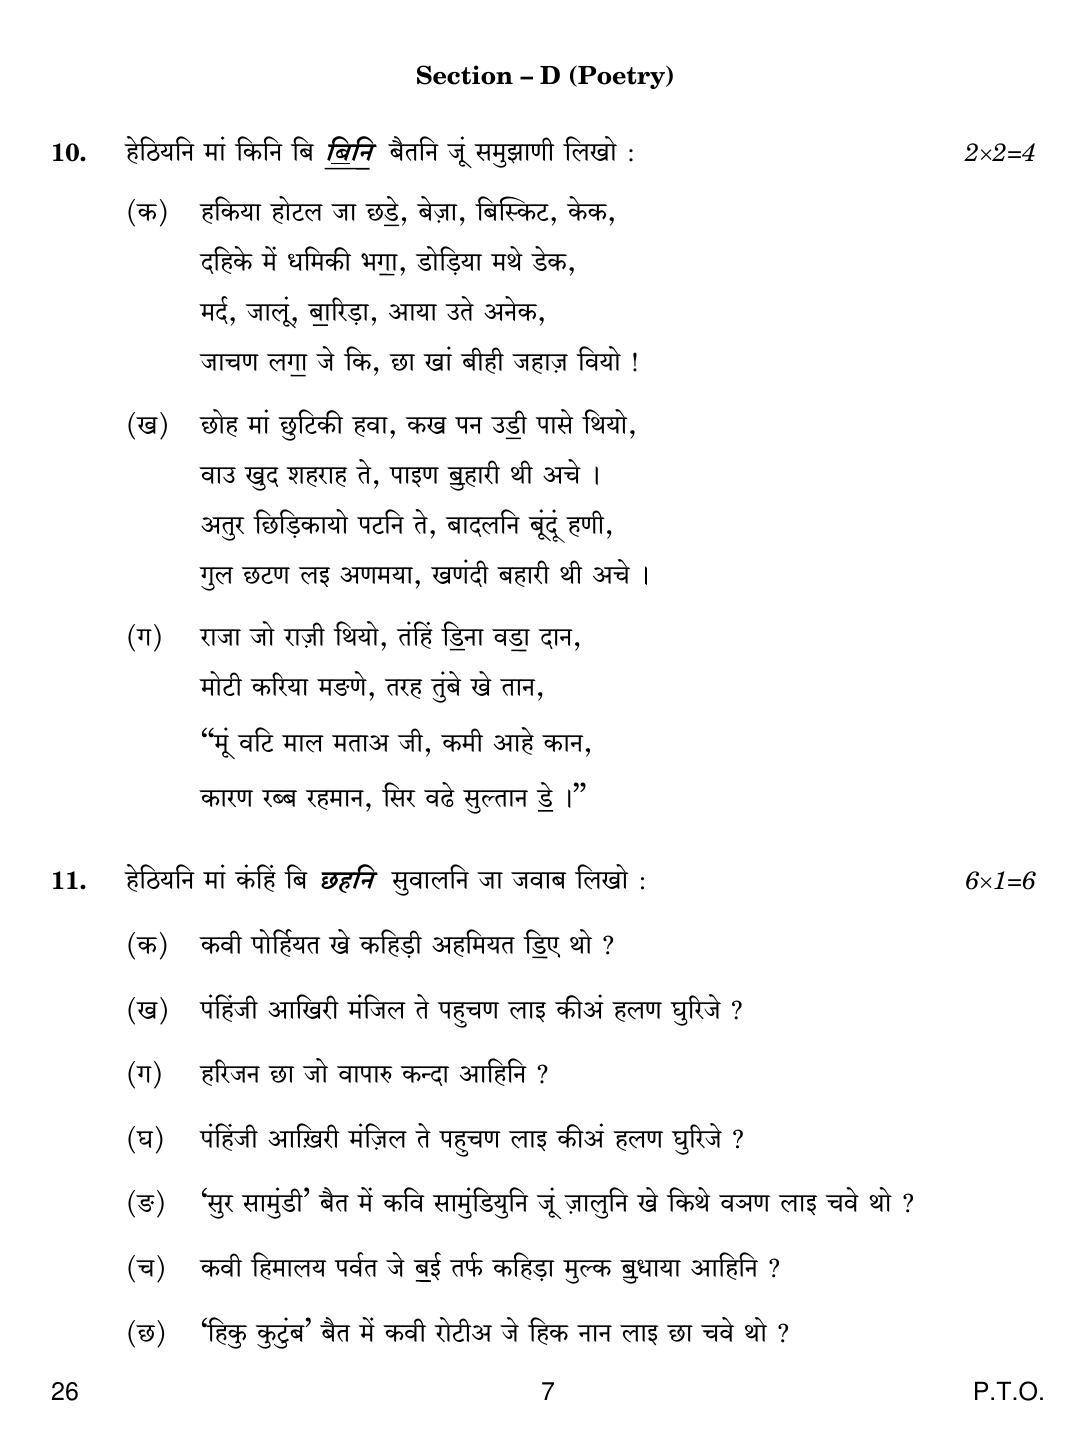 CBSE Class 10 26 SINDHI 2019 Question Paper - Page 7